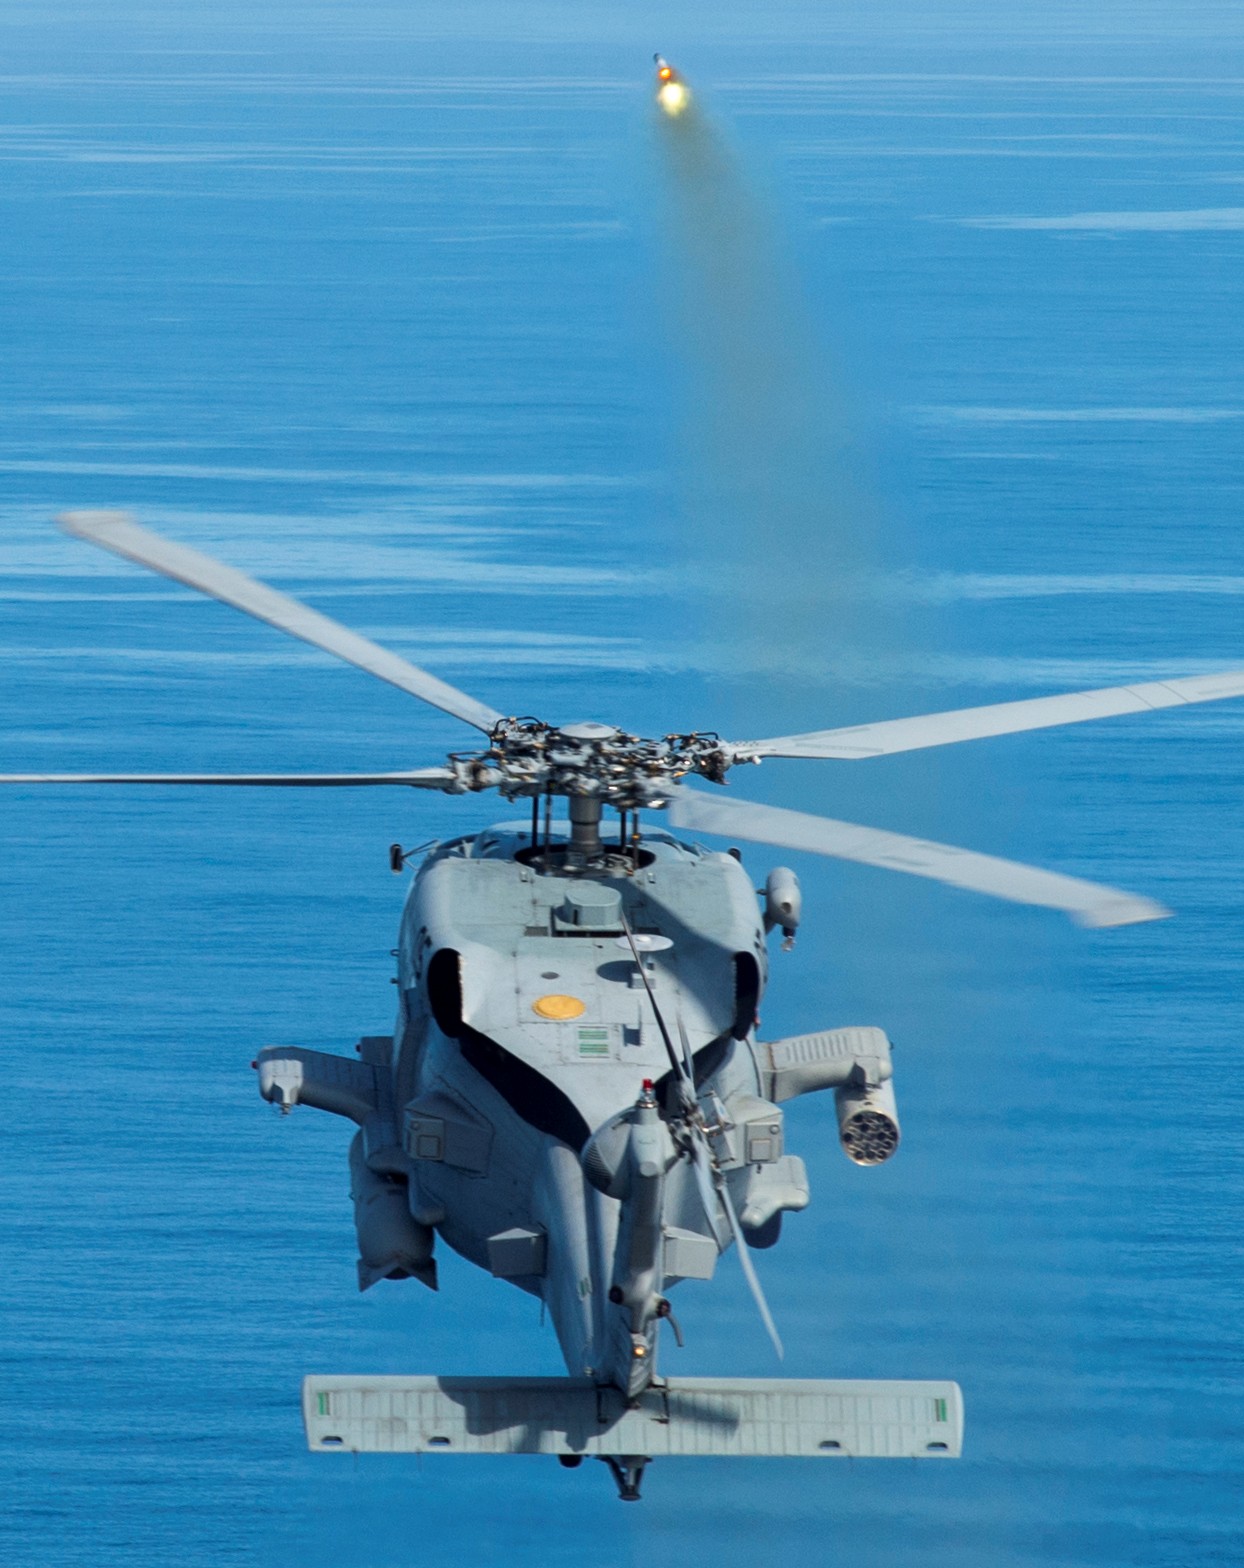 hsm-71 raptors helicopter maritime strike squadron mh-60r seahawk navy 2015 17